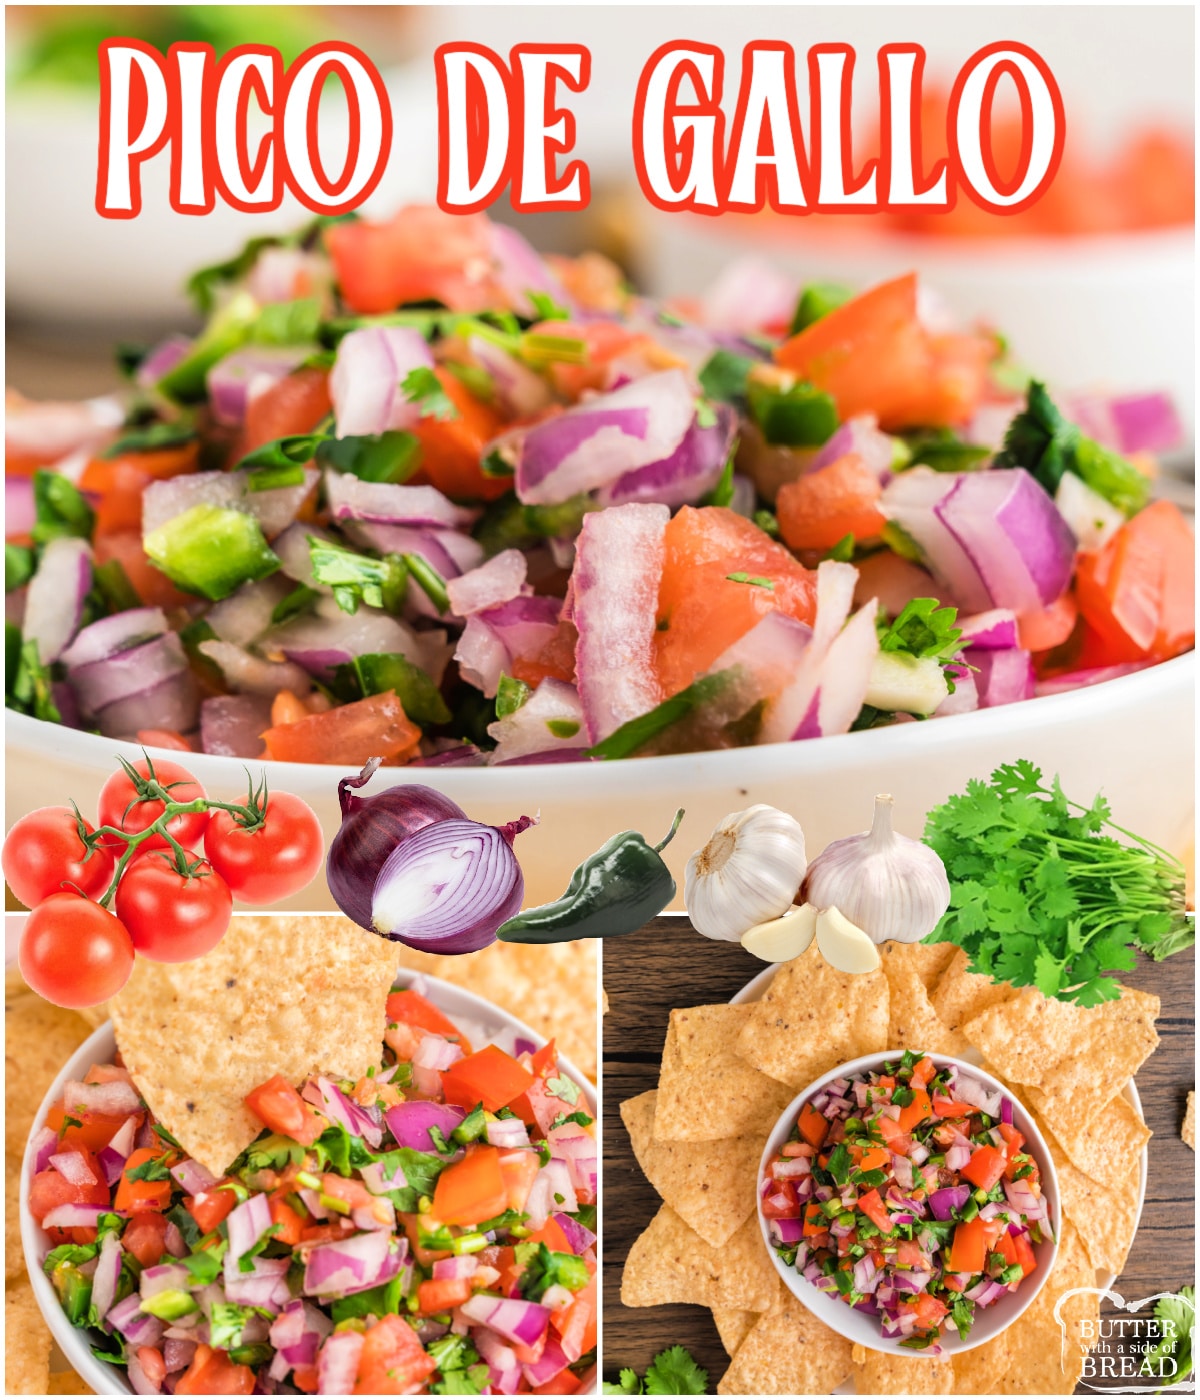 Pico de Gallo is fresh, delicious, and packed with flavor. Homemade pico de gallo is easy to make and pairs perfectly with chips and all of your favorite Mexican dishes.